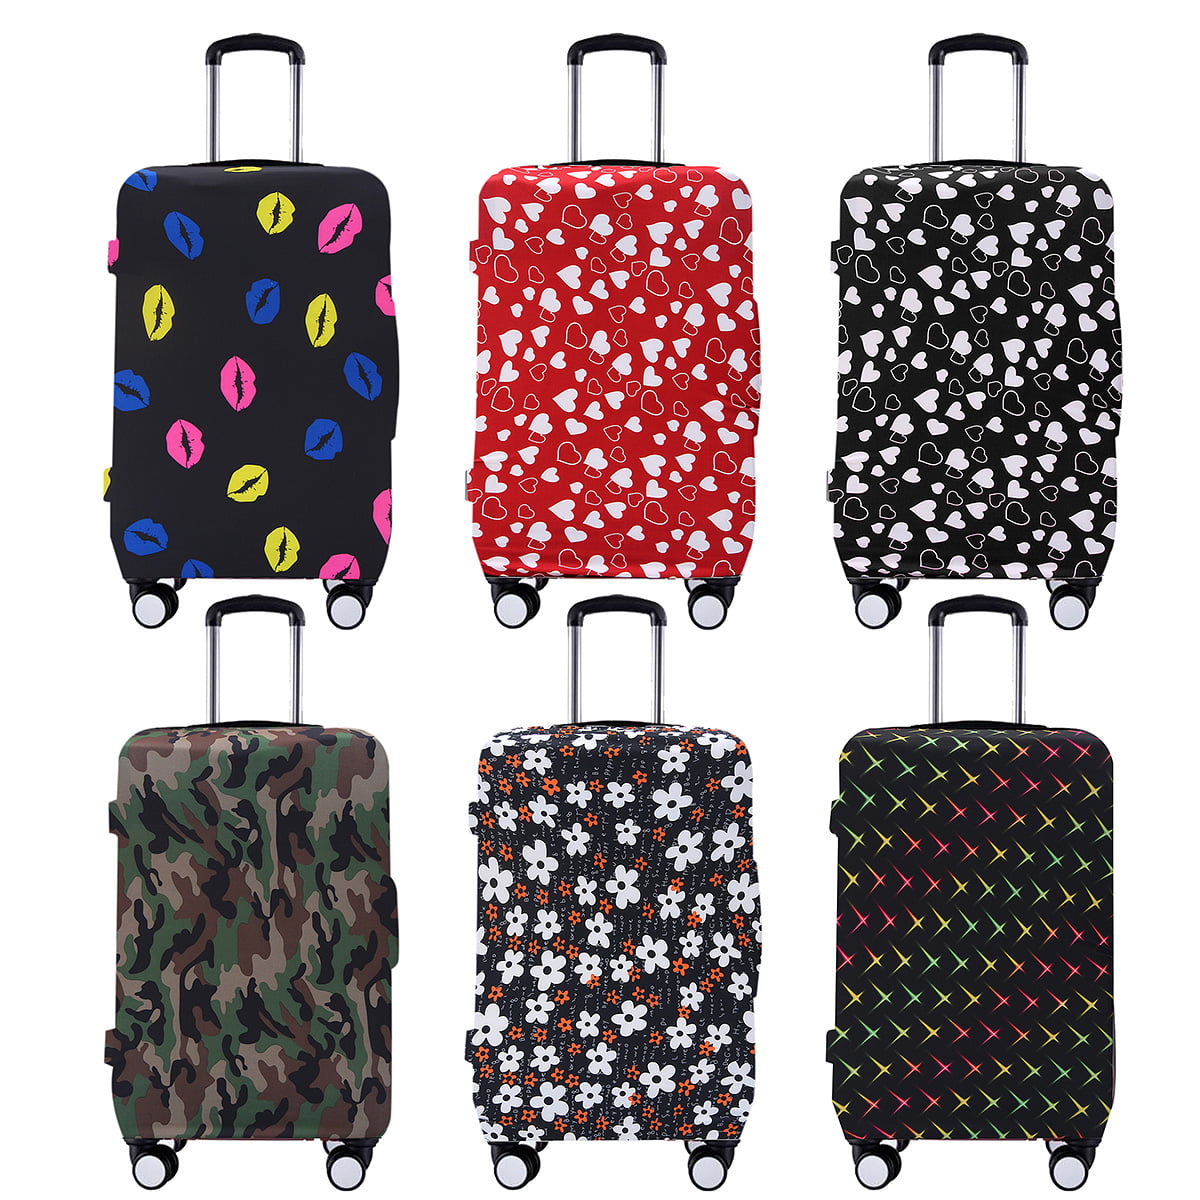 M, Pink Black Zebra Washable Luggage Covers Anti-scratch Baggage Cover Protector Dust Thicken Elasticity Cover Travel for 22-24 inch Luggage